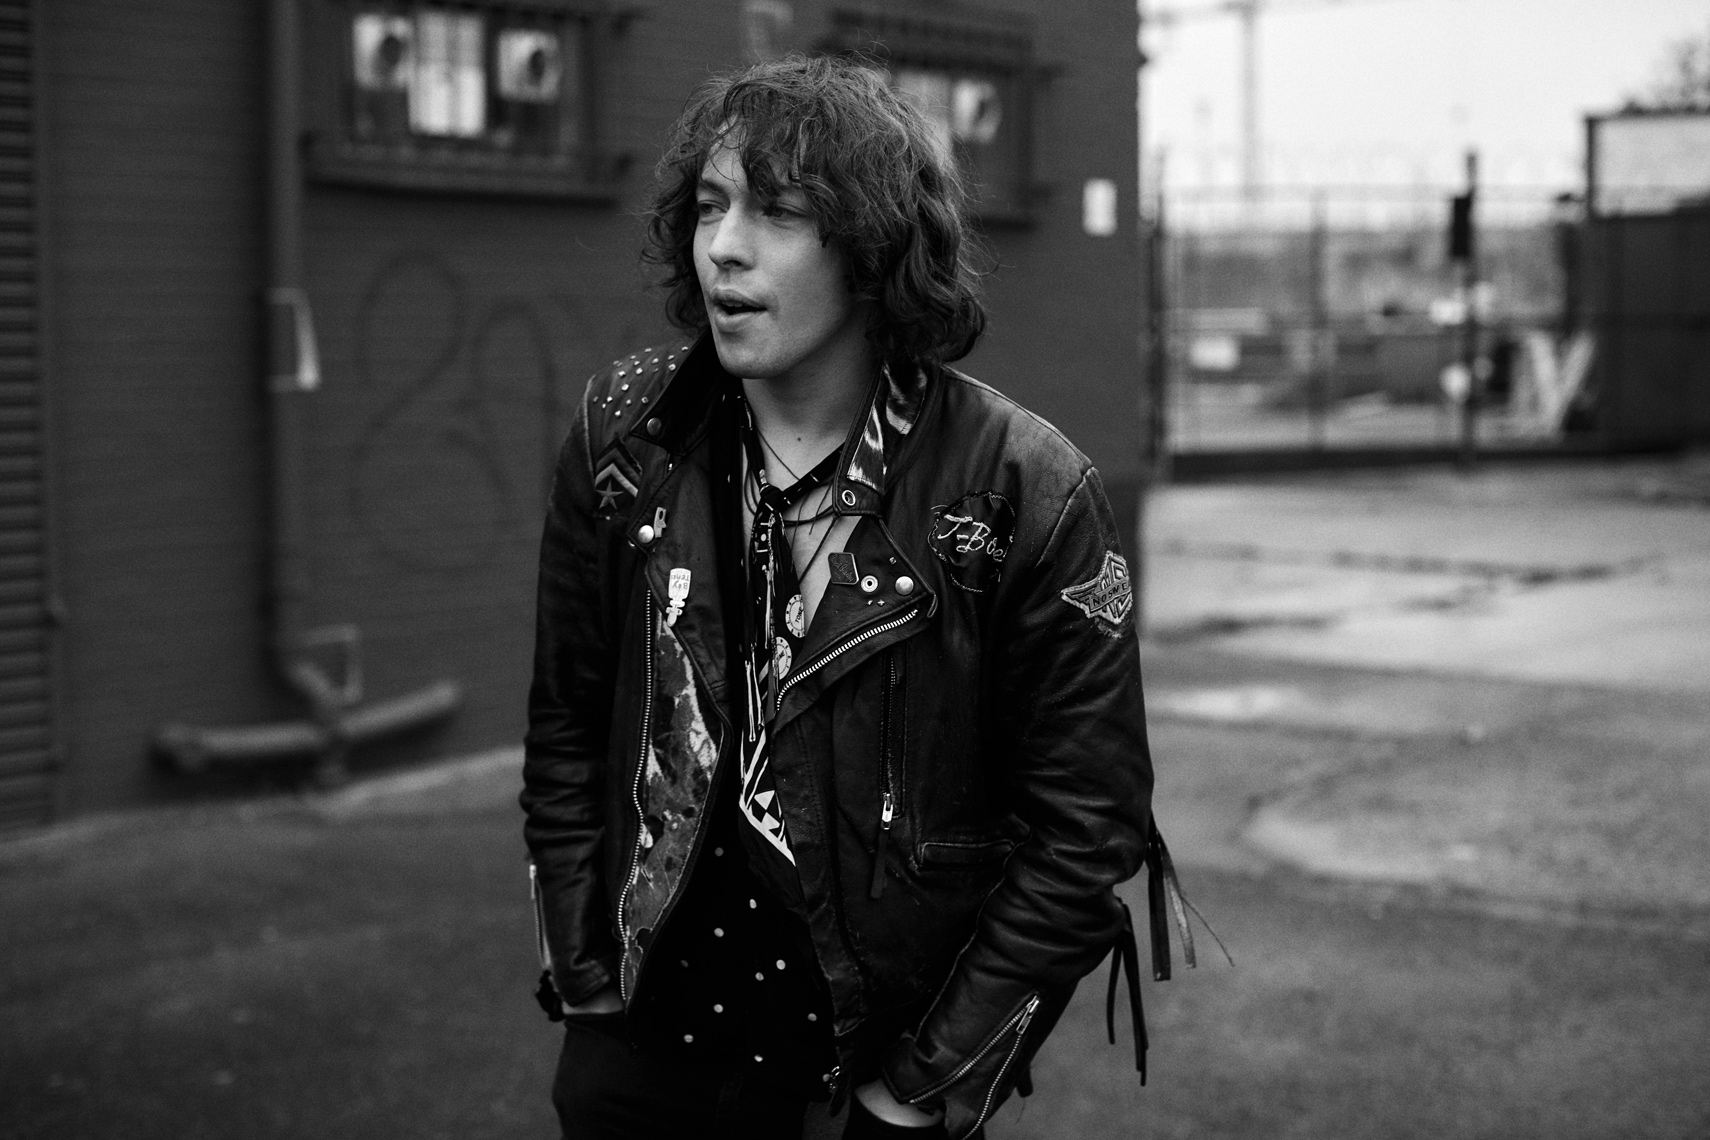 Barns Courtney by Tom Oxley